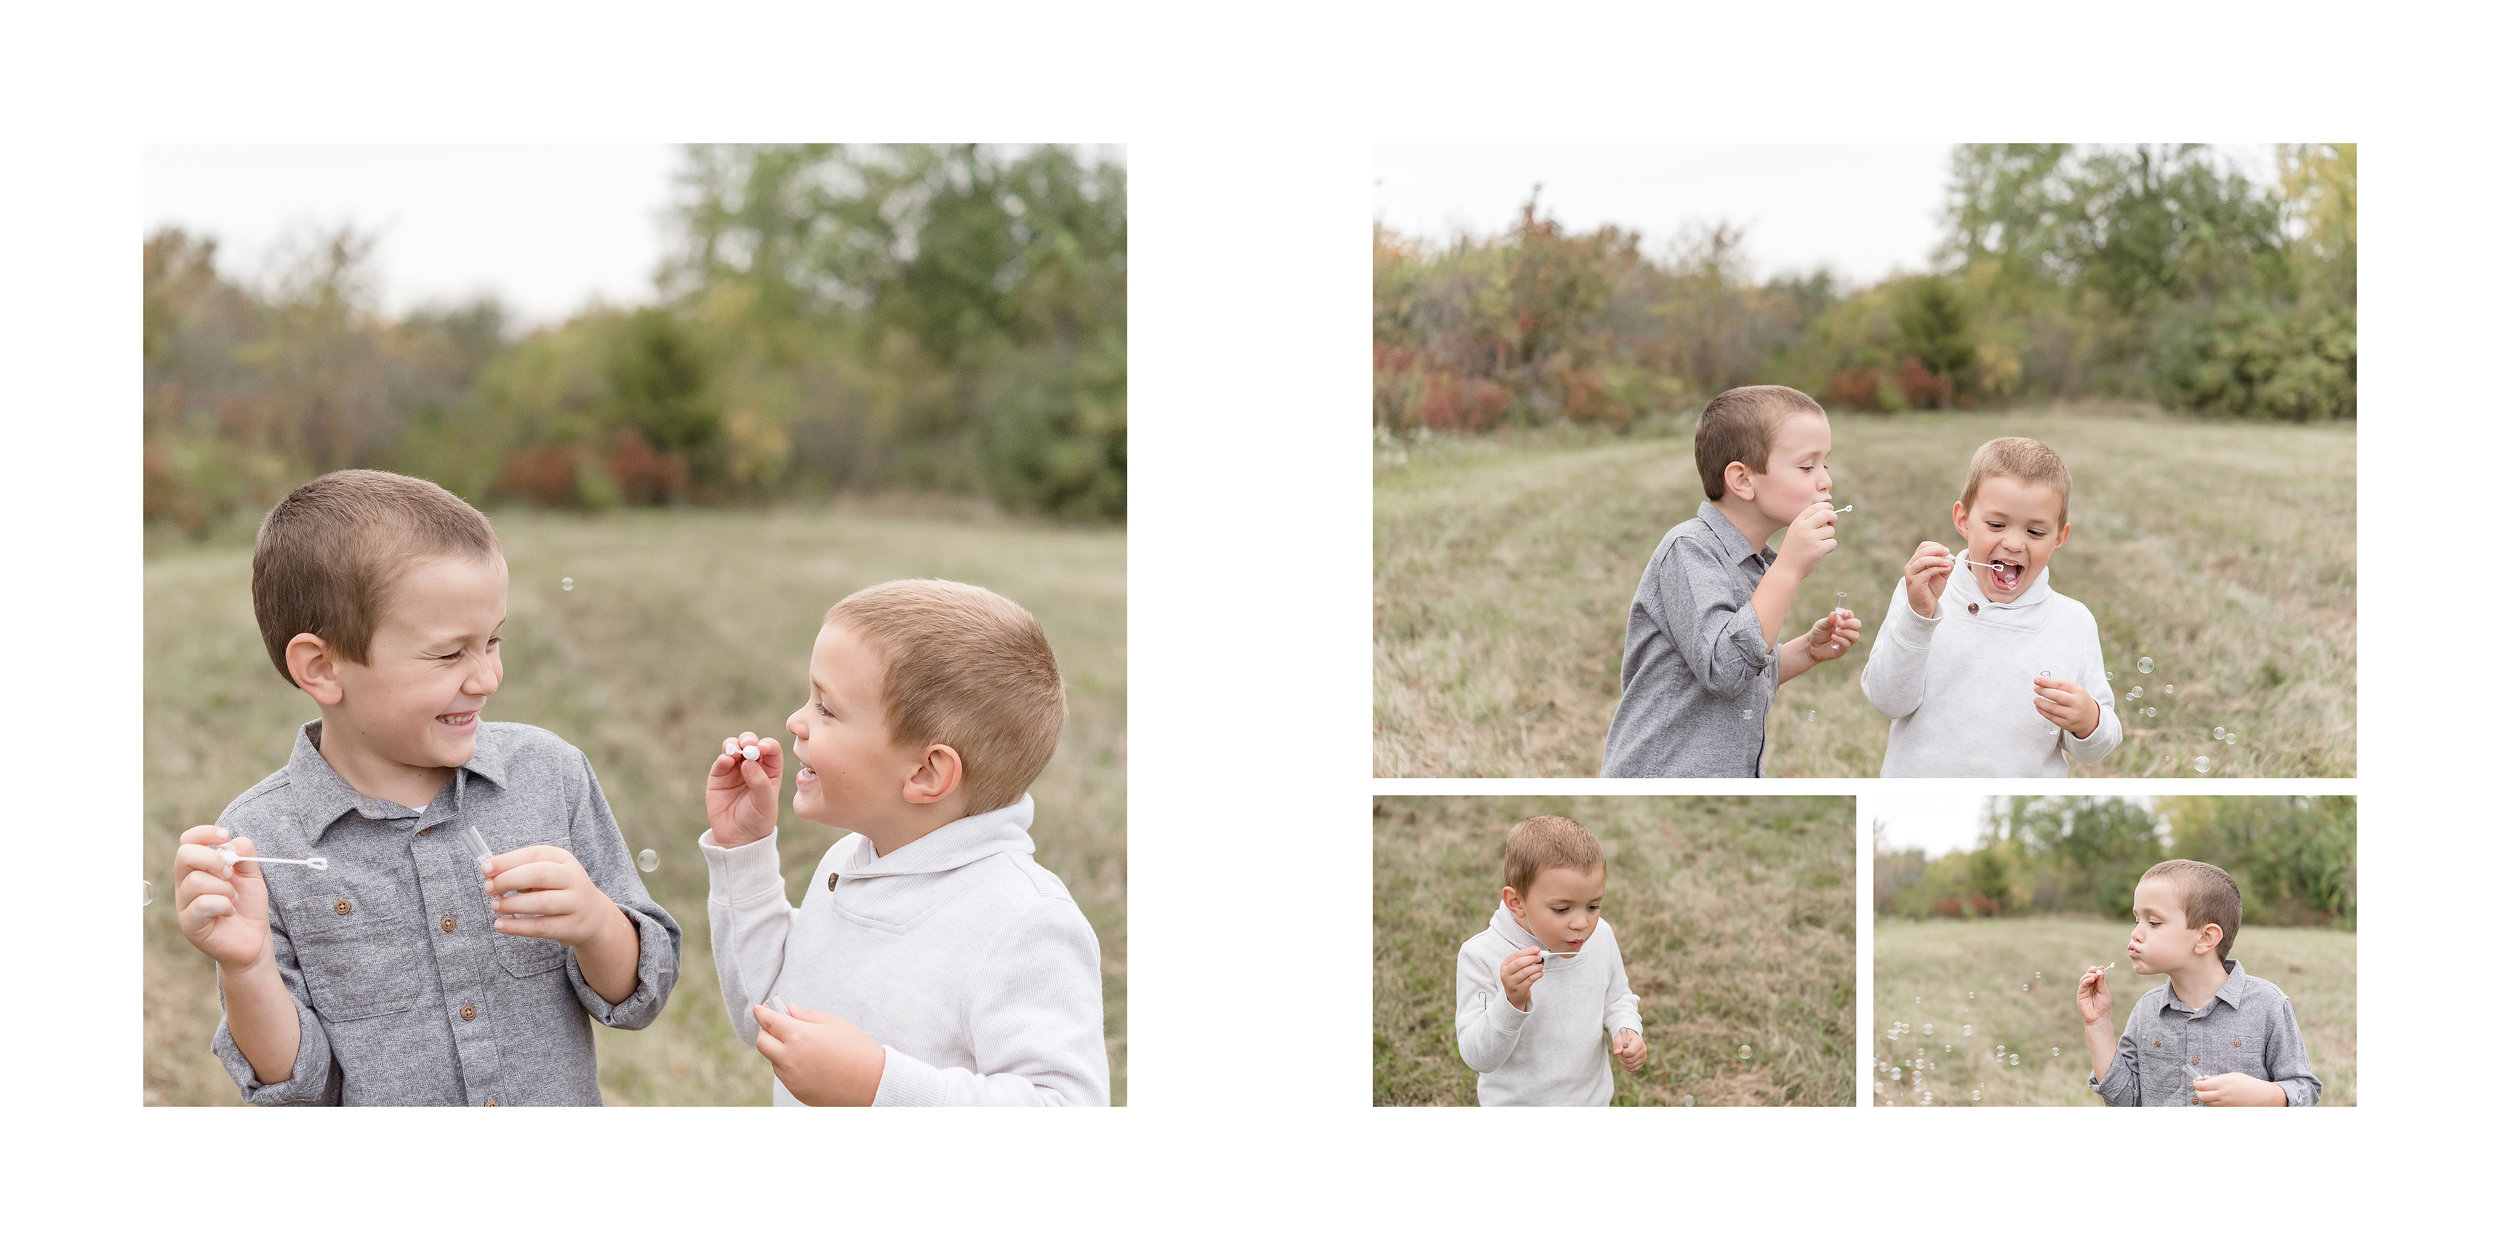 Brother blowing bubbles